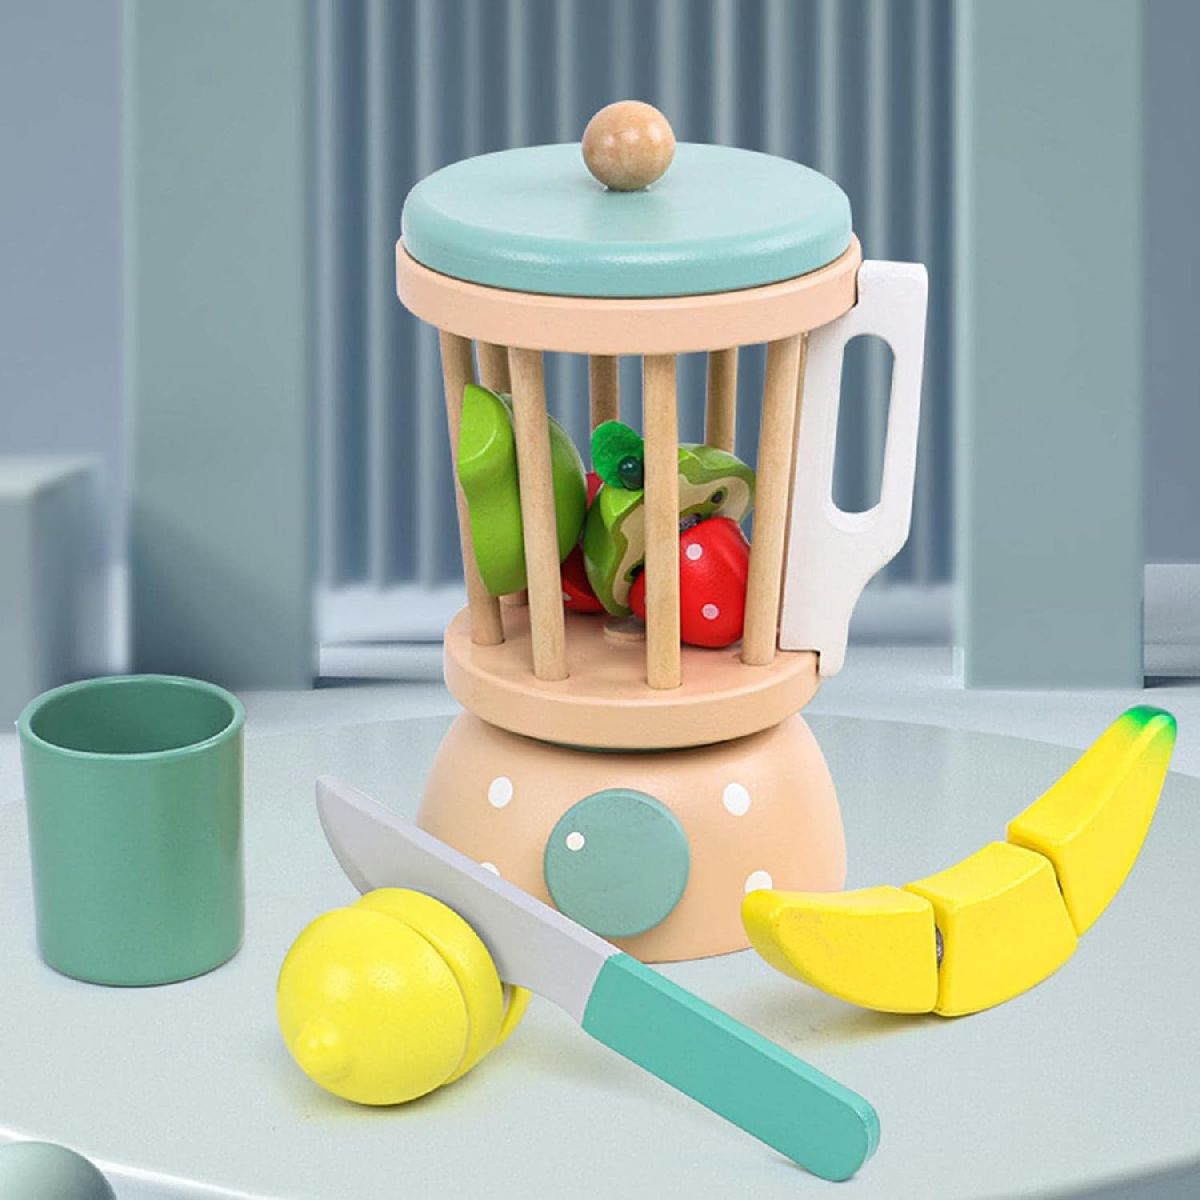 Wooden Smoothie Maker Set Cooking Fruit Simulation Educational Toys |Pretend Play